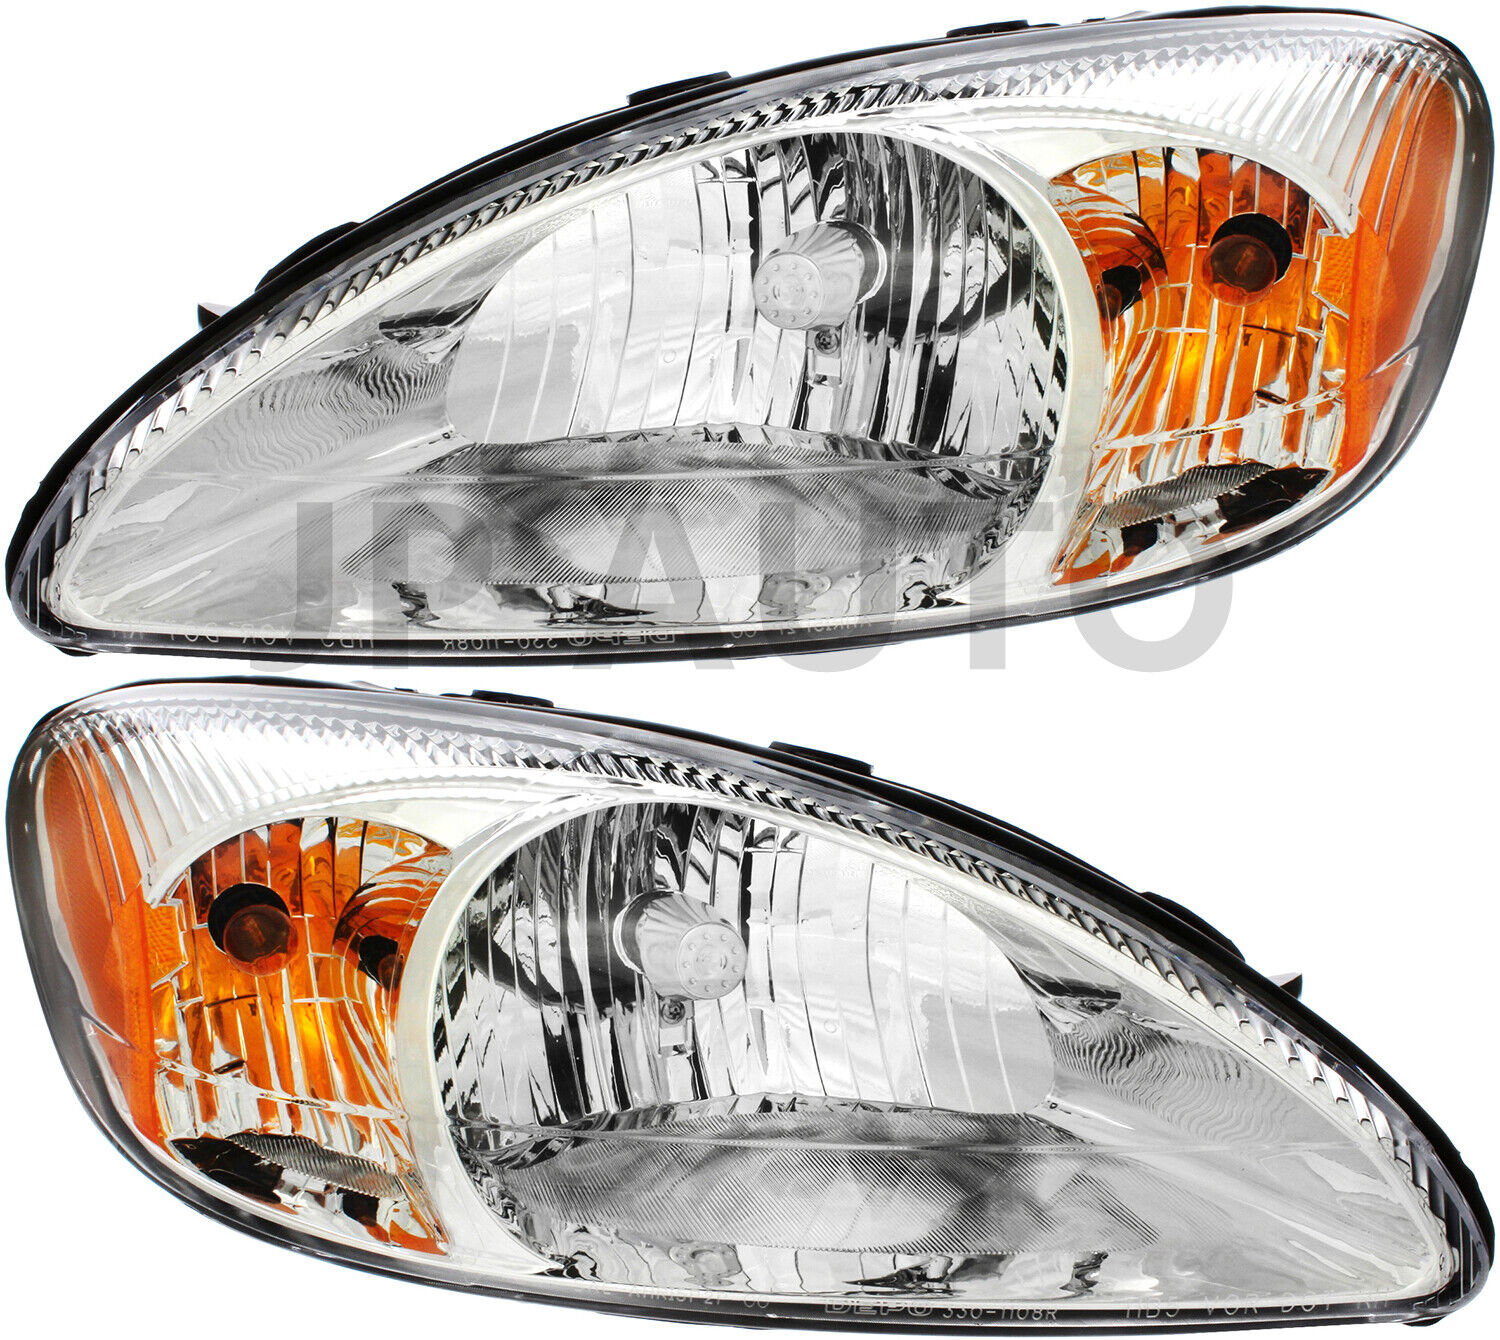 For 2000-2007 Ford Taurus Headlight Halogen Set Driver and Passenger Side